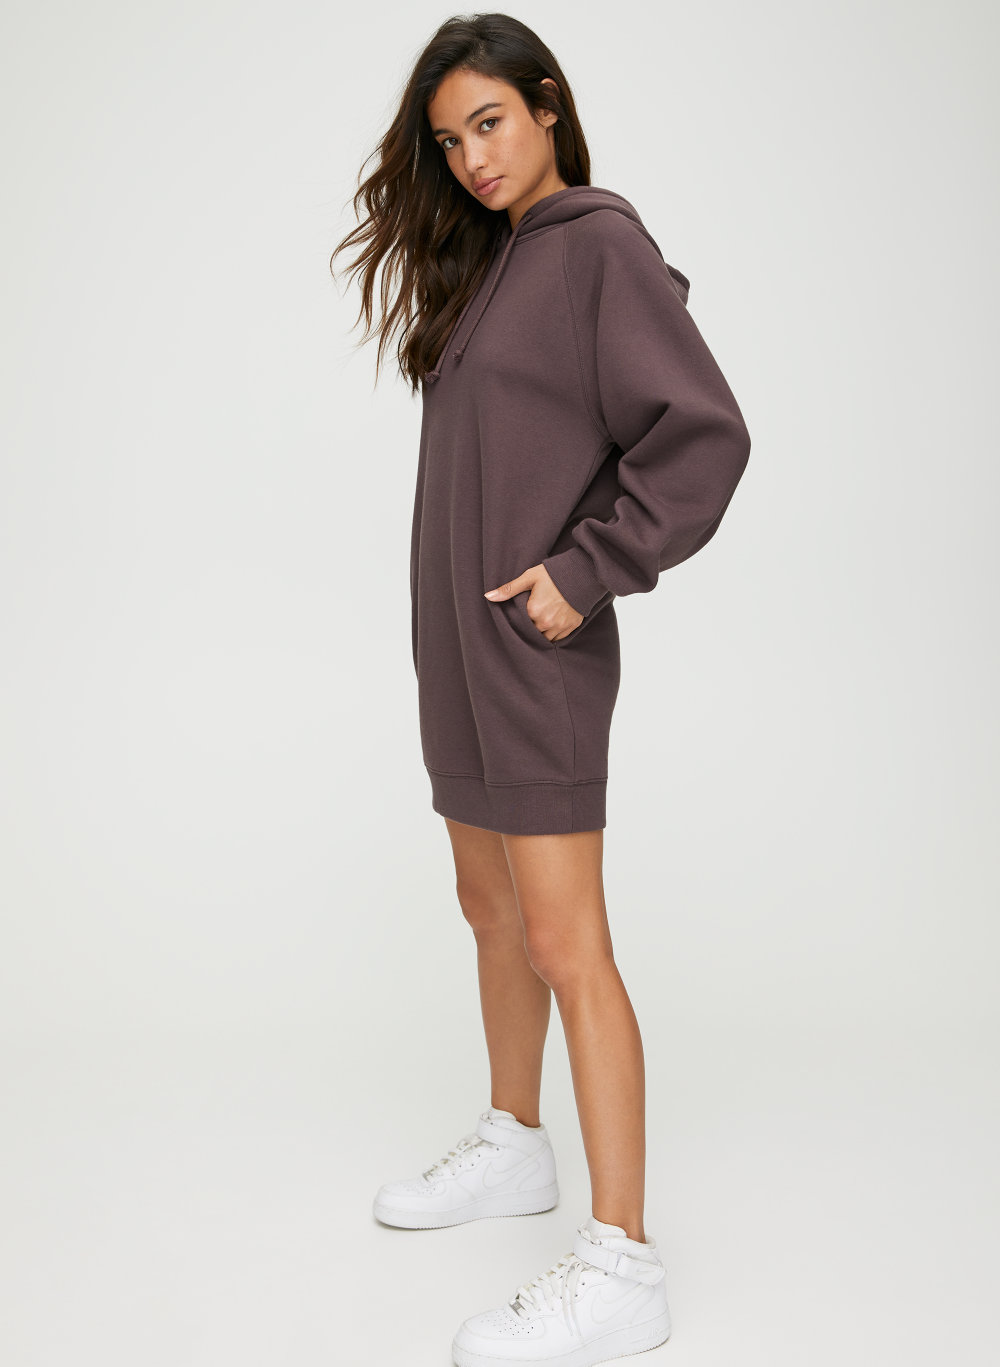 cute outfits with oversized hoodies